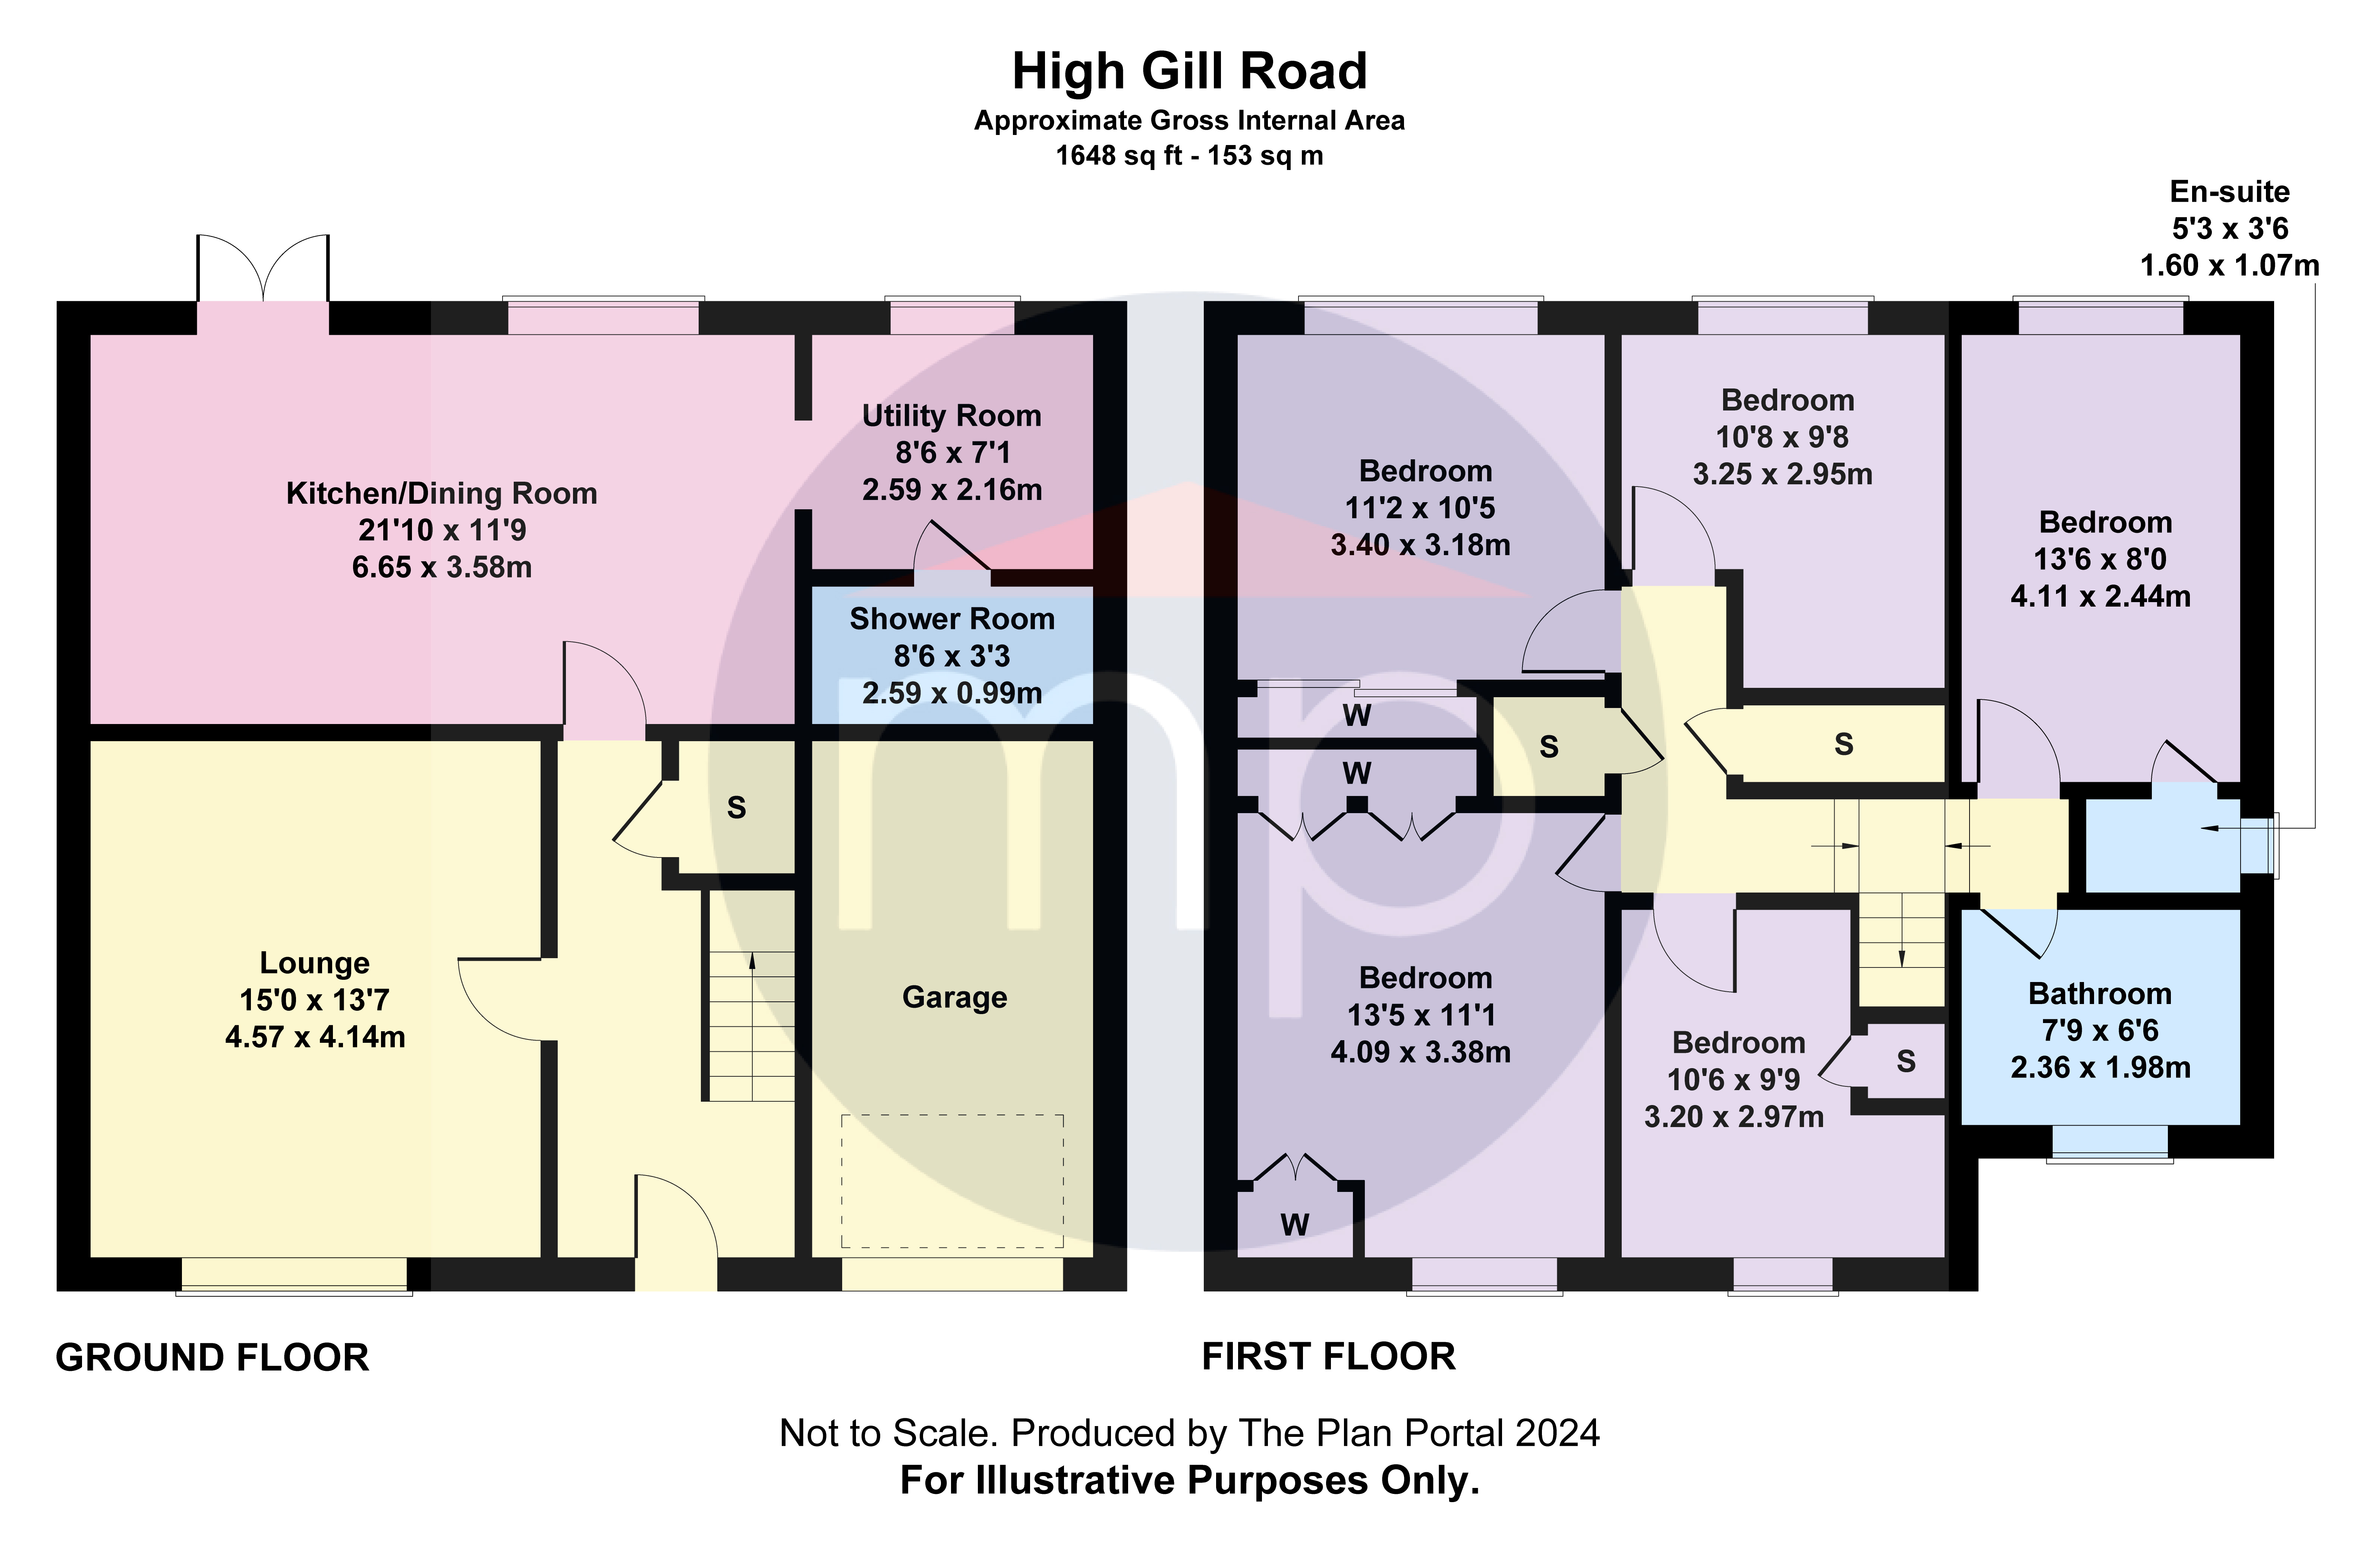 5 bed  for sale in High Gill Road, Nunthorpe - Property floorplan